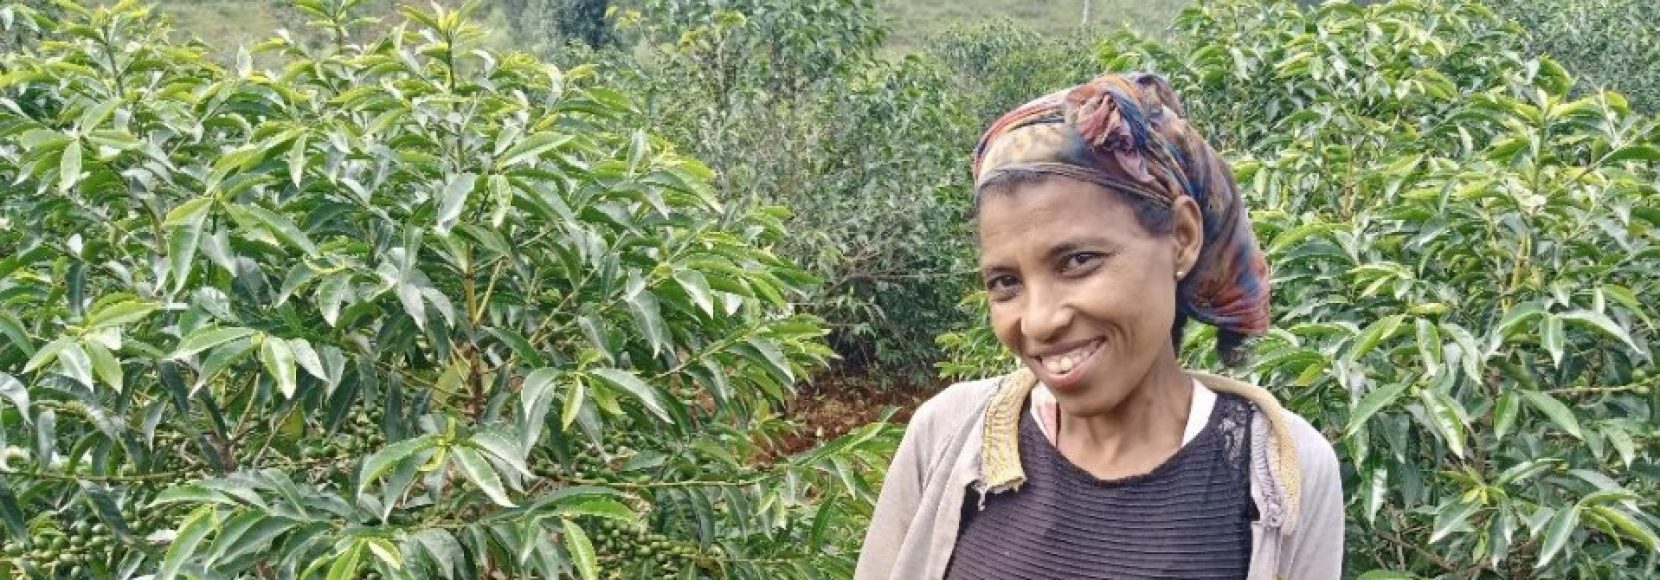 promoting gender equality in the coffee industry means empowering women farmers and small agribusiness owners